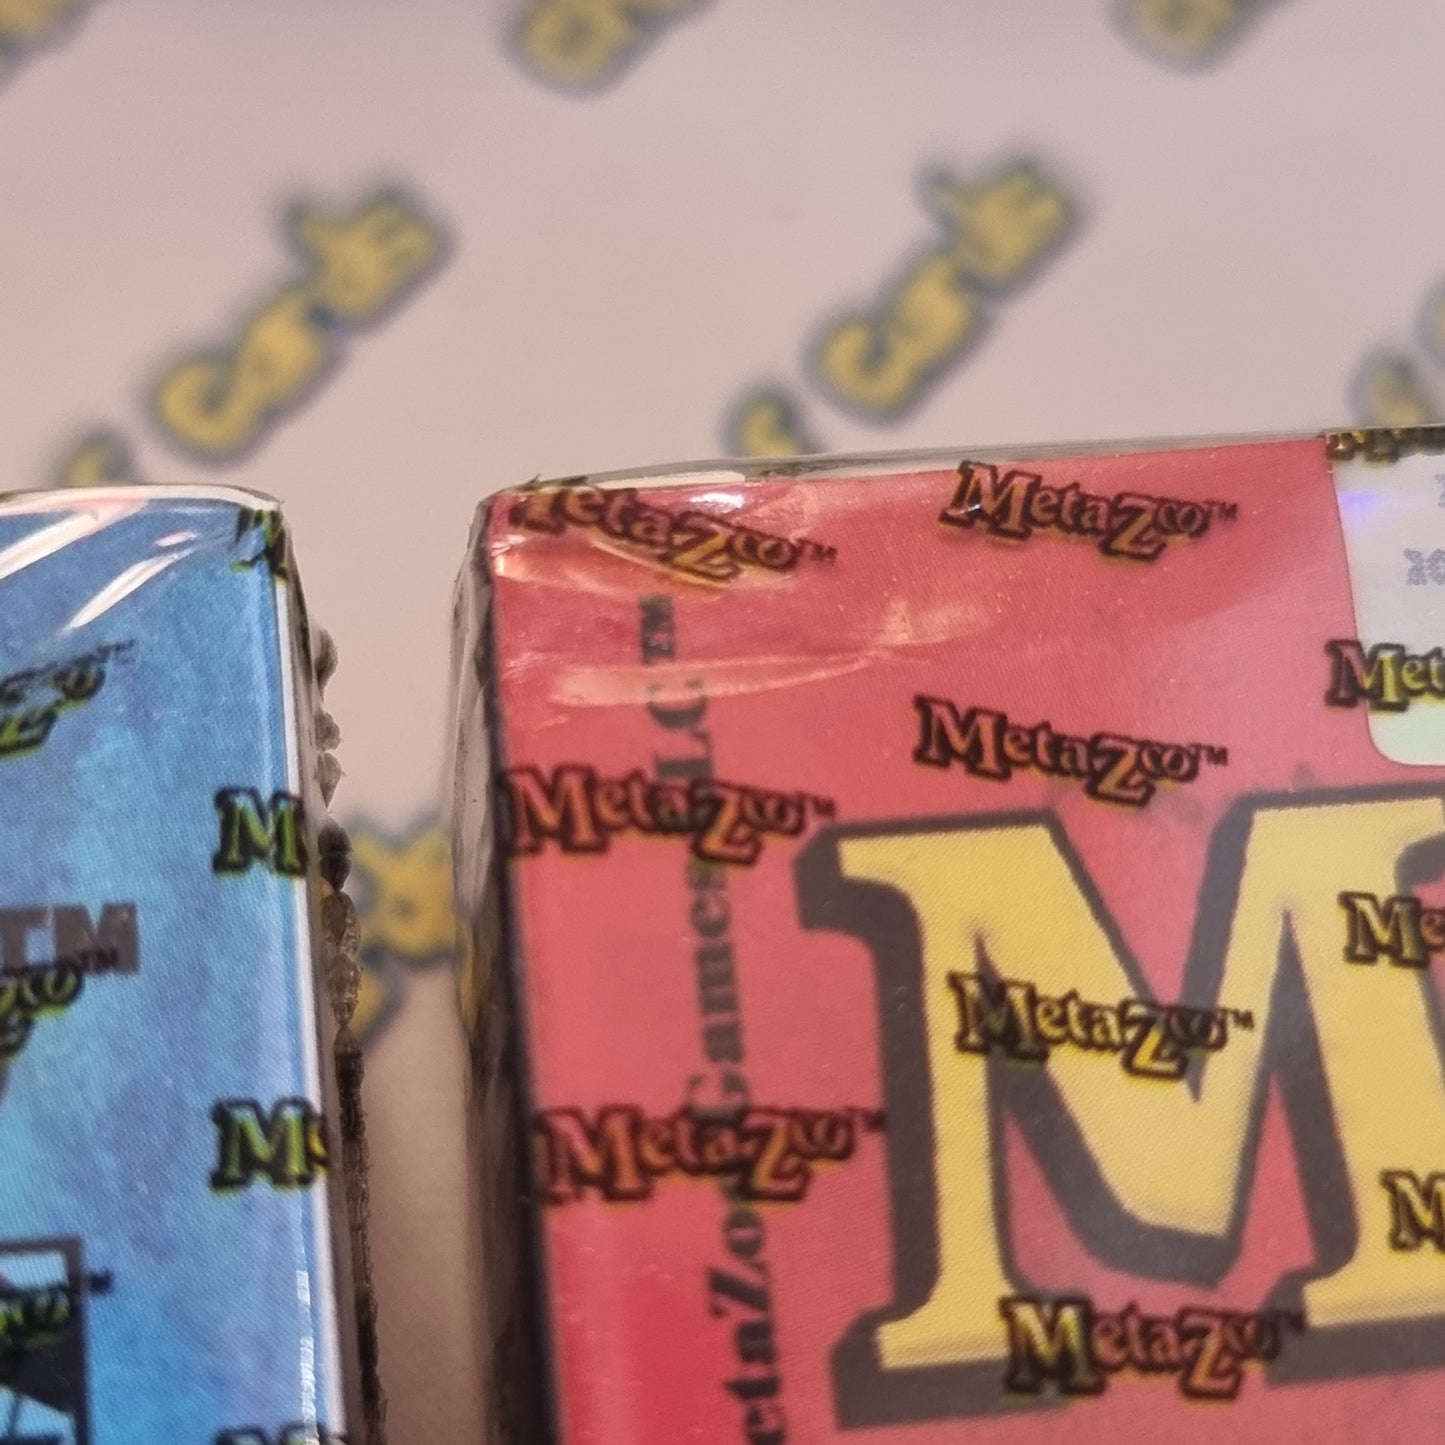 MetaZoo Cryptid Nation (2nd Edition) Deck Set - DAMAGED BOXES